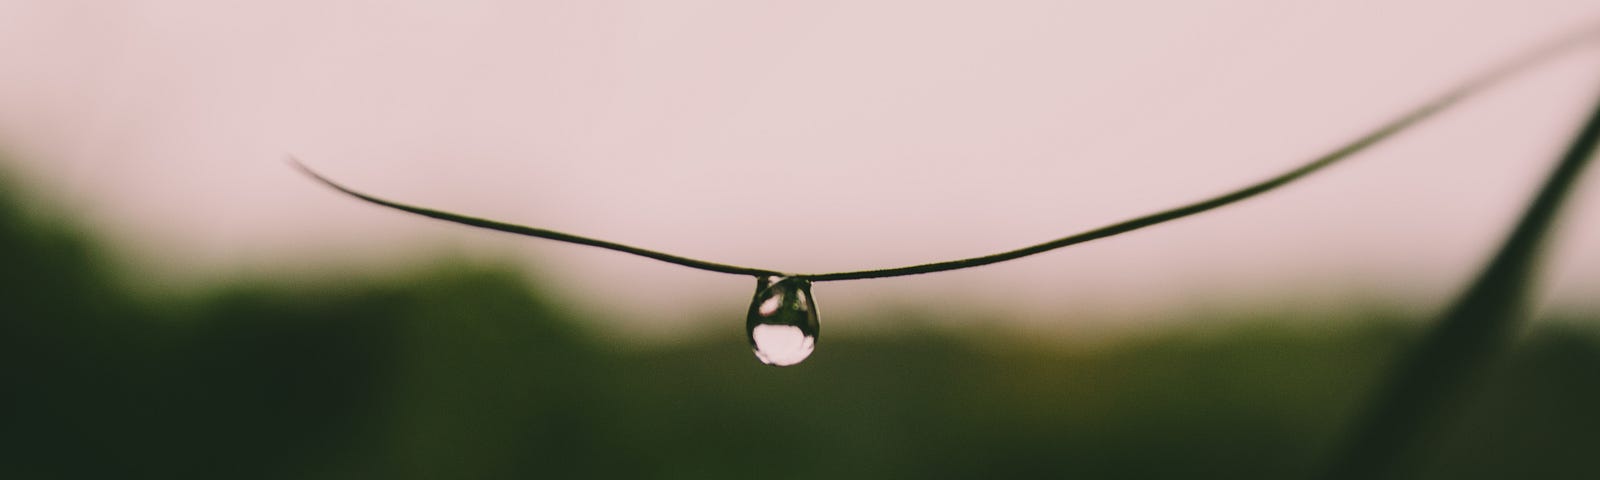 A doplet of water clings to a very thin blad of grass. The blade of grass is horizontal and the water droplet looks like it might fall. The background is a grayish pink sky and blurred greenery.